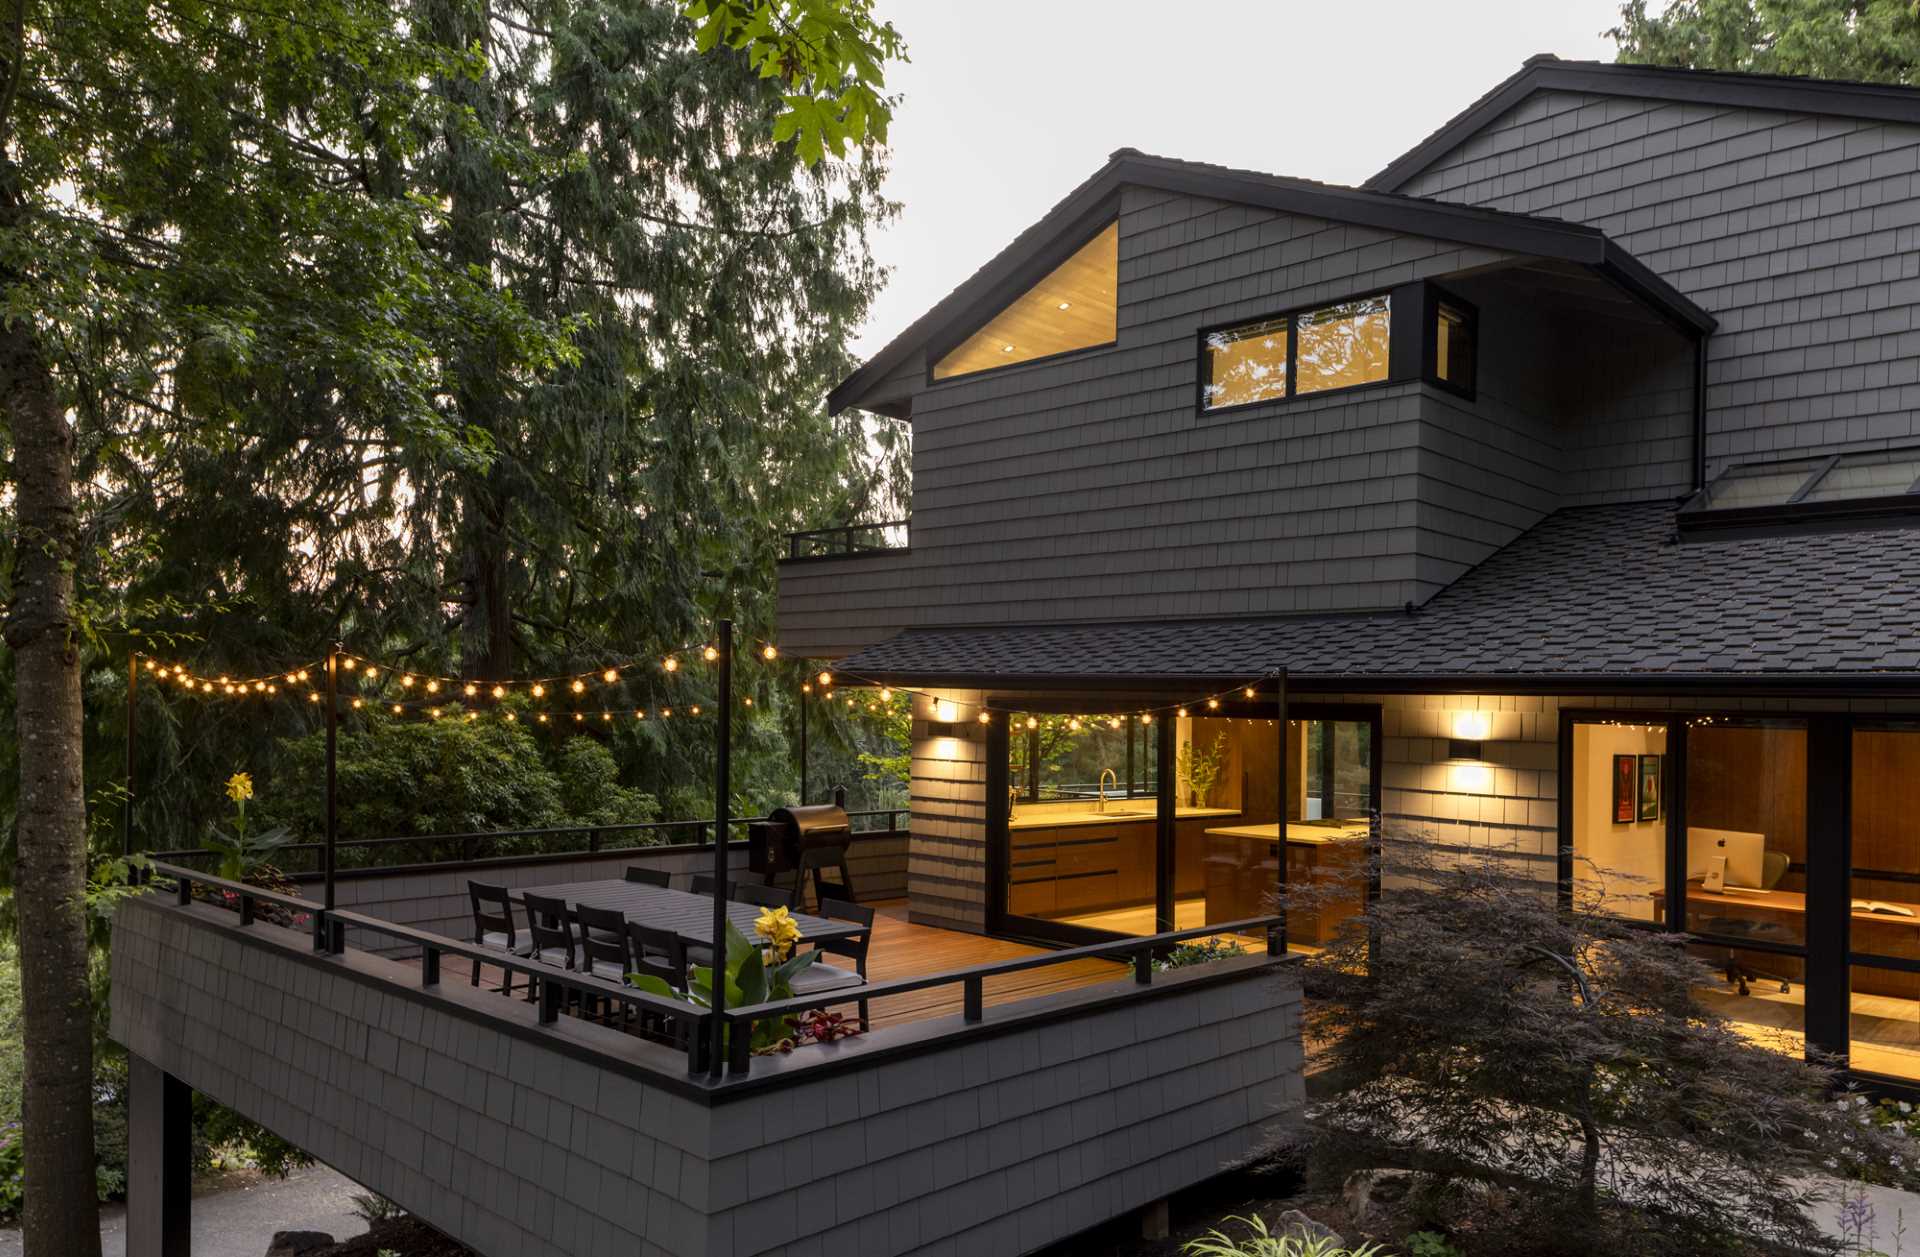 The contemporary remodel of a 1970s home included an updated exterior and interior.